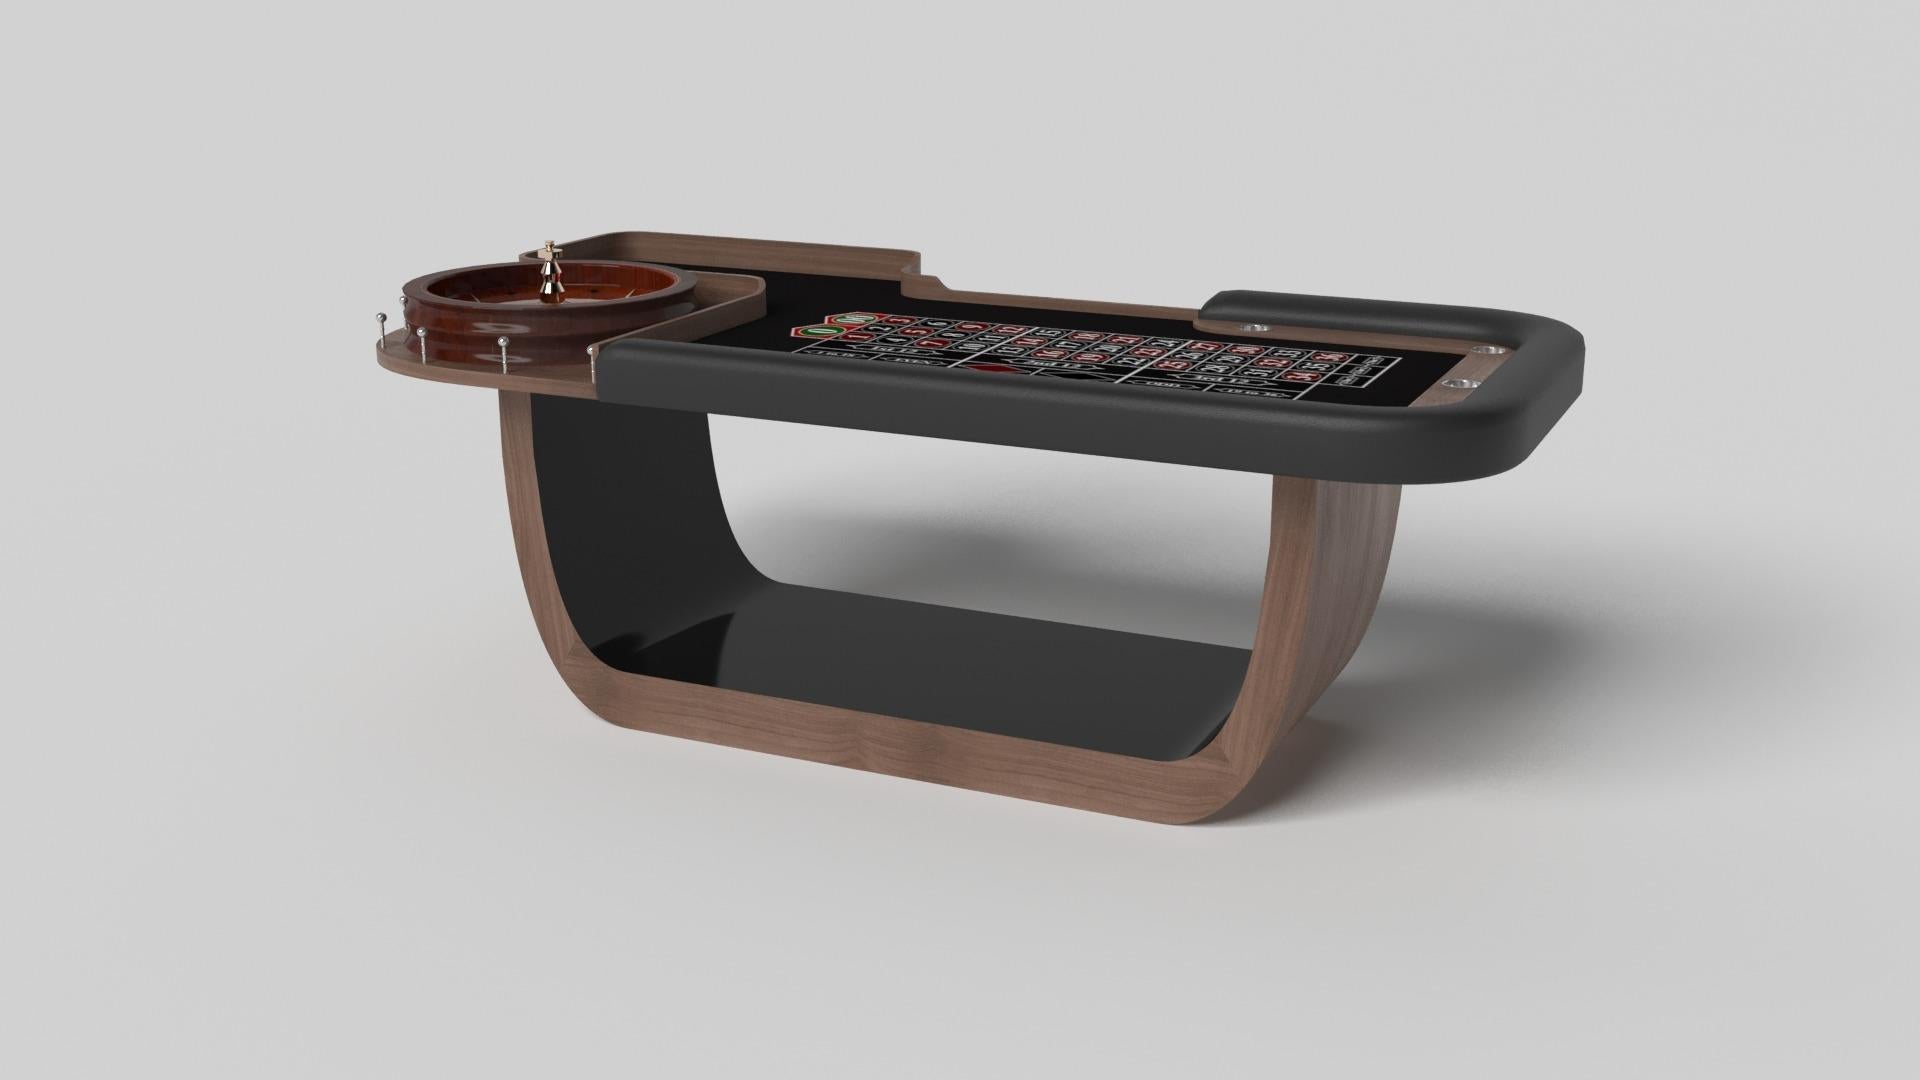 Handcrafted with intricate accents and a precision-carved curved base, the Sid roulette table in black encompasses a series of smooth edges, distinctive details, and unconventional elements in one unique expression of luxury design. Built by hand